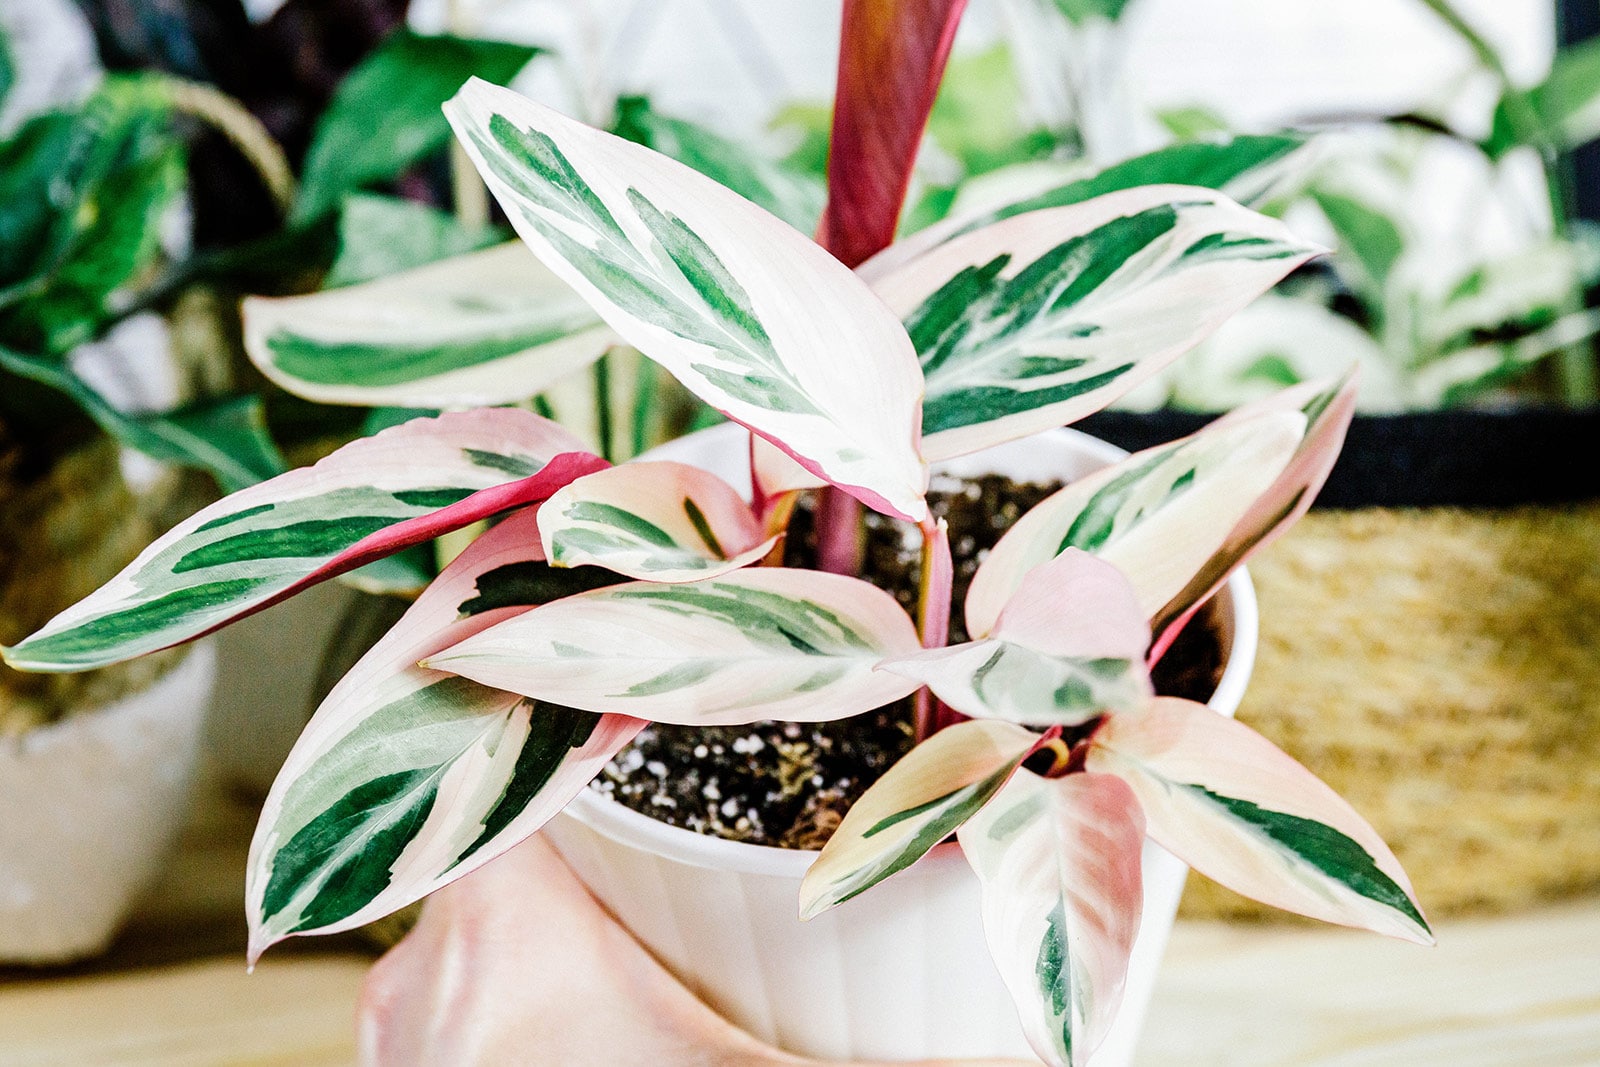 A Stromanthe Triostar plant in a white pot with other houseplants out of focus in the background